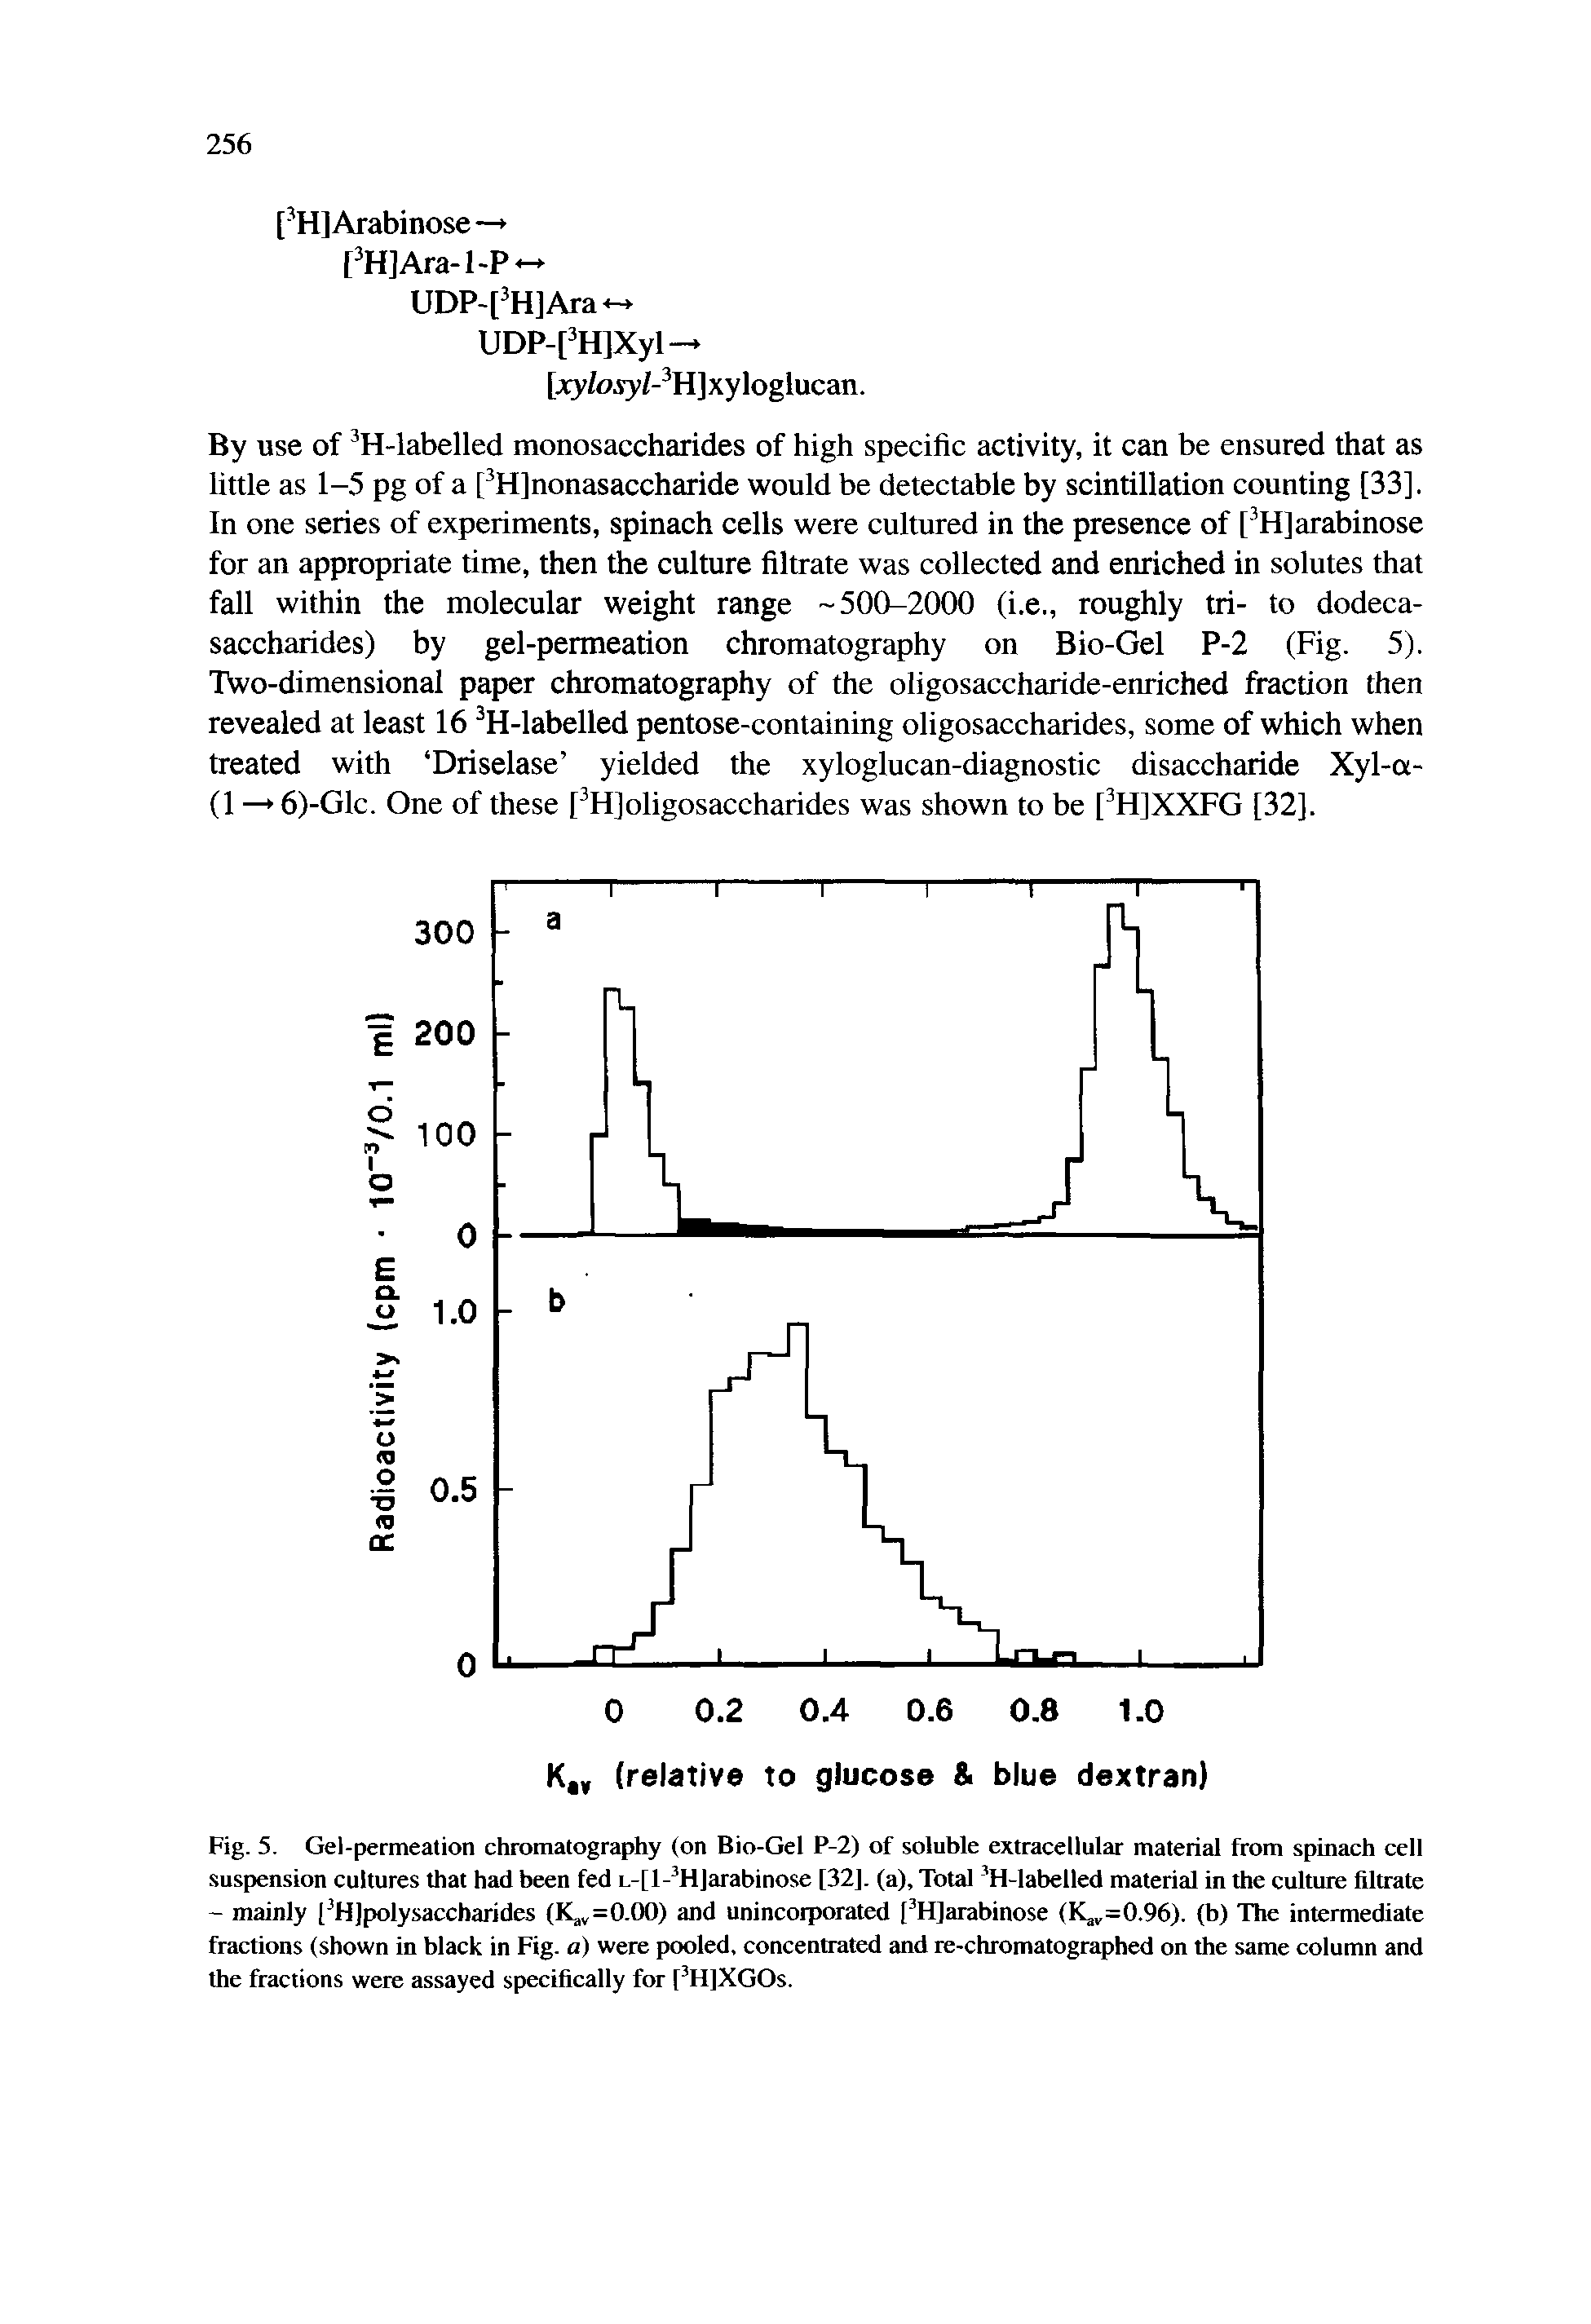 Fig. 5. Gel-permeation chromatography (on Bio-Gel P-2) of soluble extracellular material from spinach cell suspension cultures that had been fed L-[l- H]arabinose [32]. (a). Total H-labelled material in the culture filtrate - mainly [ Hjpolysaccharides (K. =0.00) and unincorporated [ HJarabinose (K,=0.96). (b) The intermediate fractions (shown in black in Fig. a) were pooled, concentrated and le-chromatographed on the same column and the fractions were assayed specifically for [ HjXGOs.